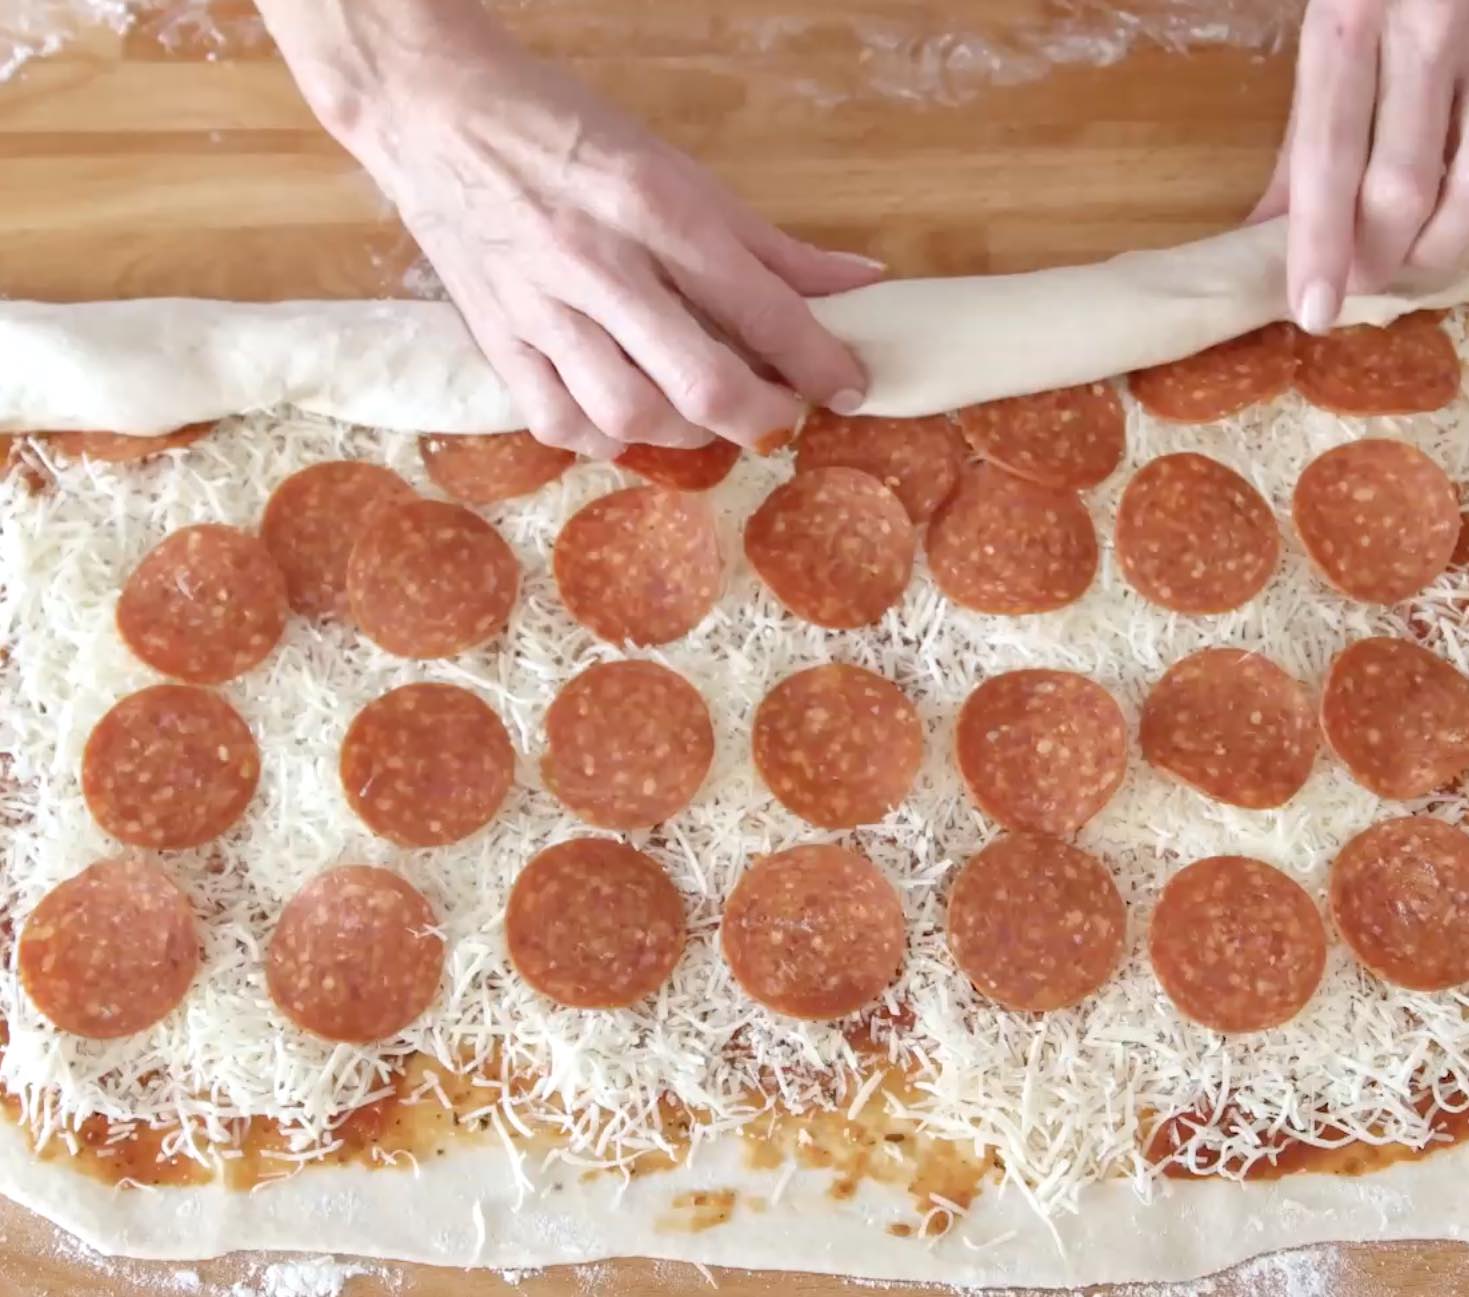 Pizza rolls are essentially pizza in rolled-up form like pinwheels. So everything goes into a pizza can be included in a pizza roll: pizza dough and pizza toppings such as tomato sauce, pepperoni and cheese. 